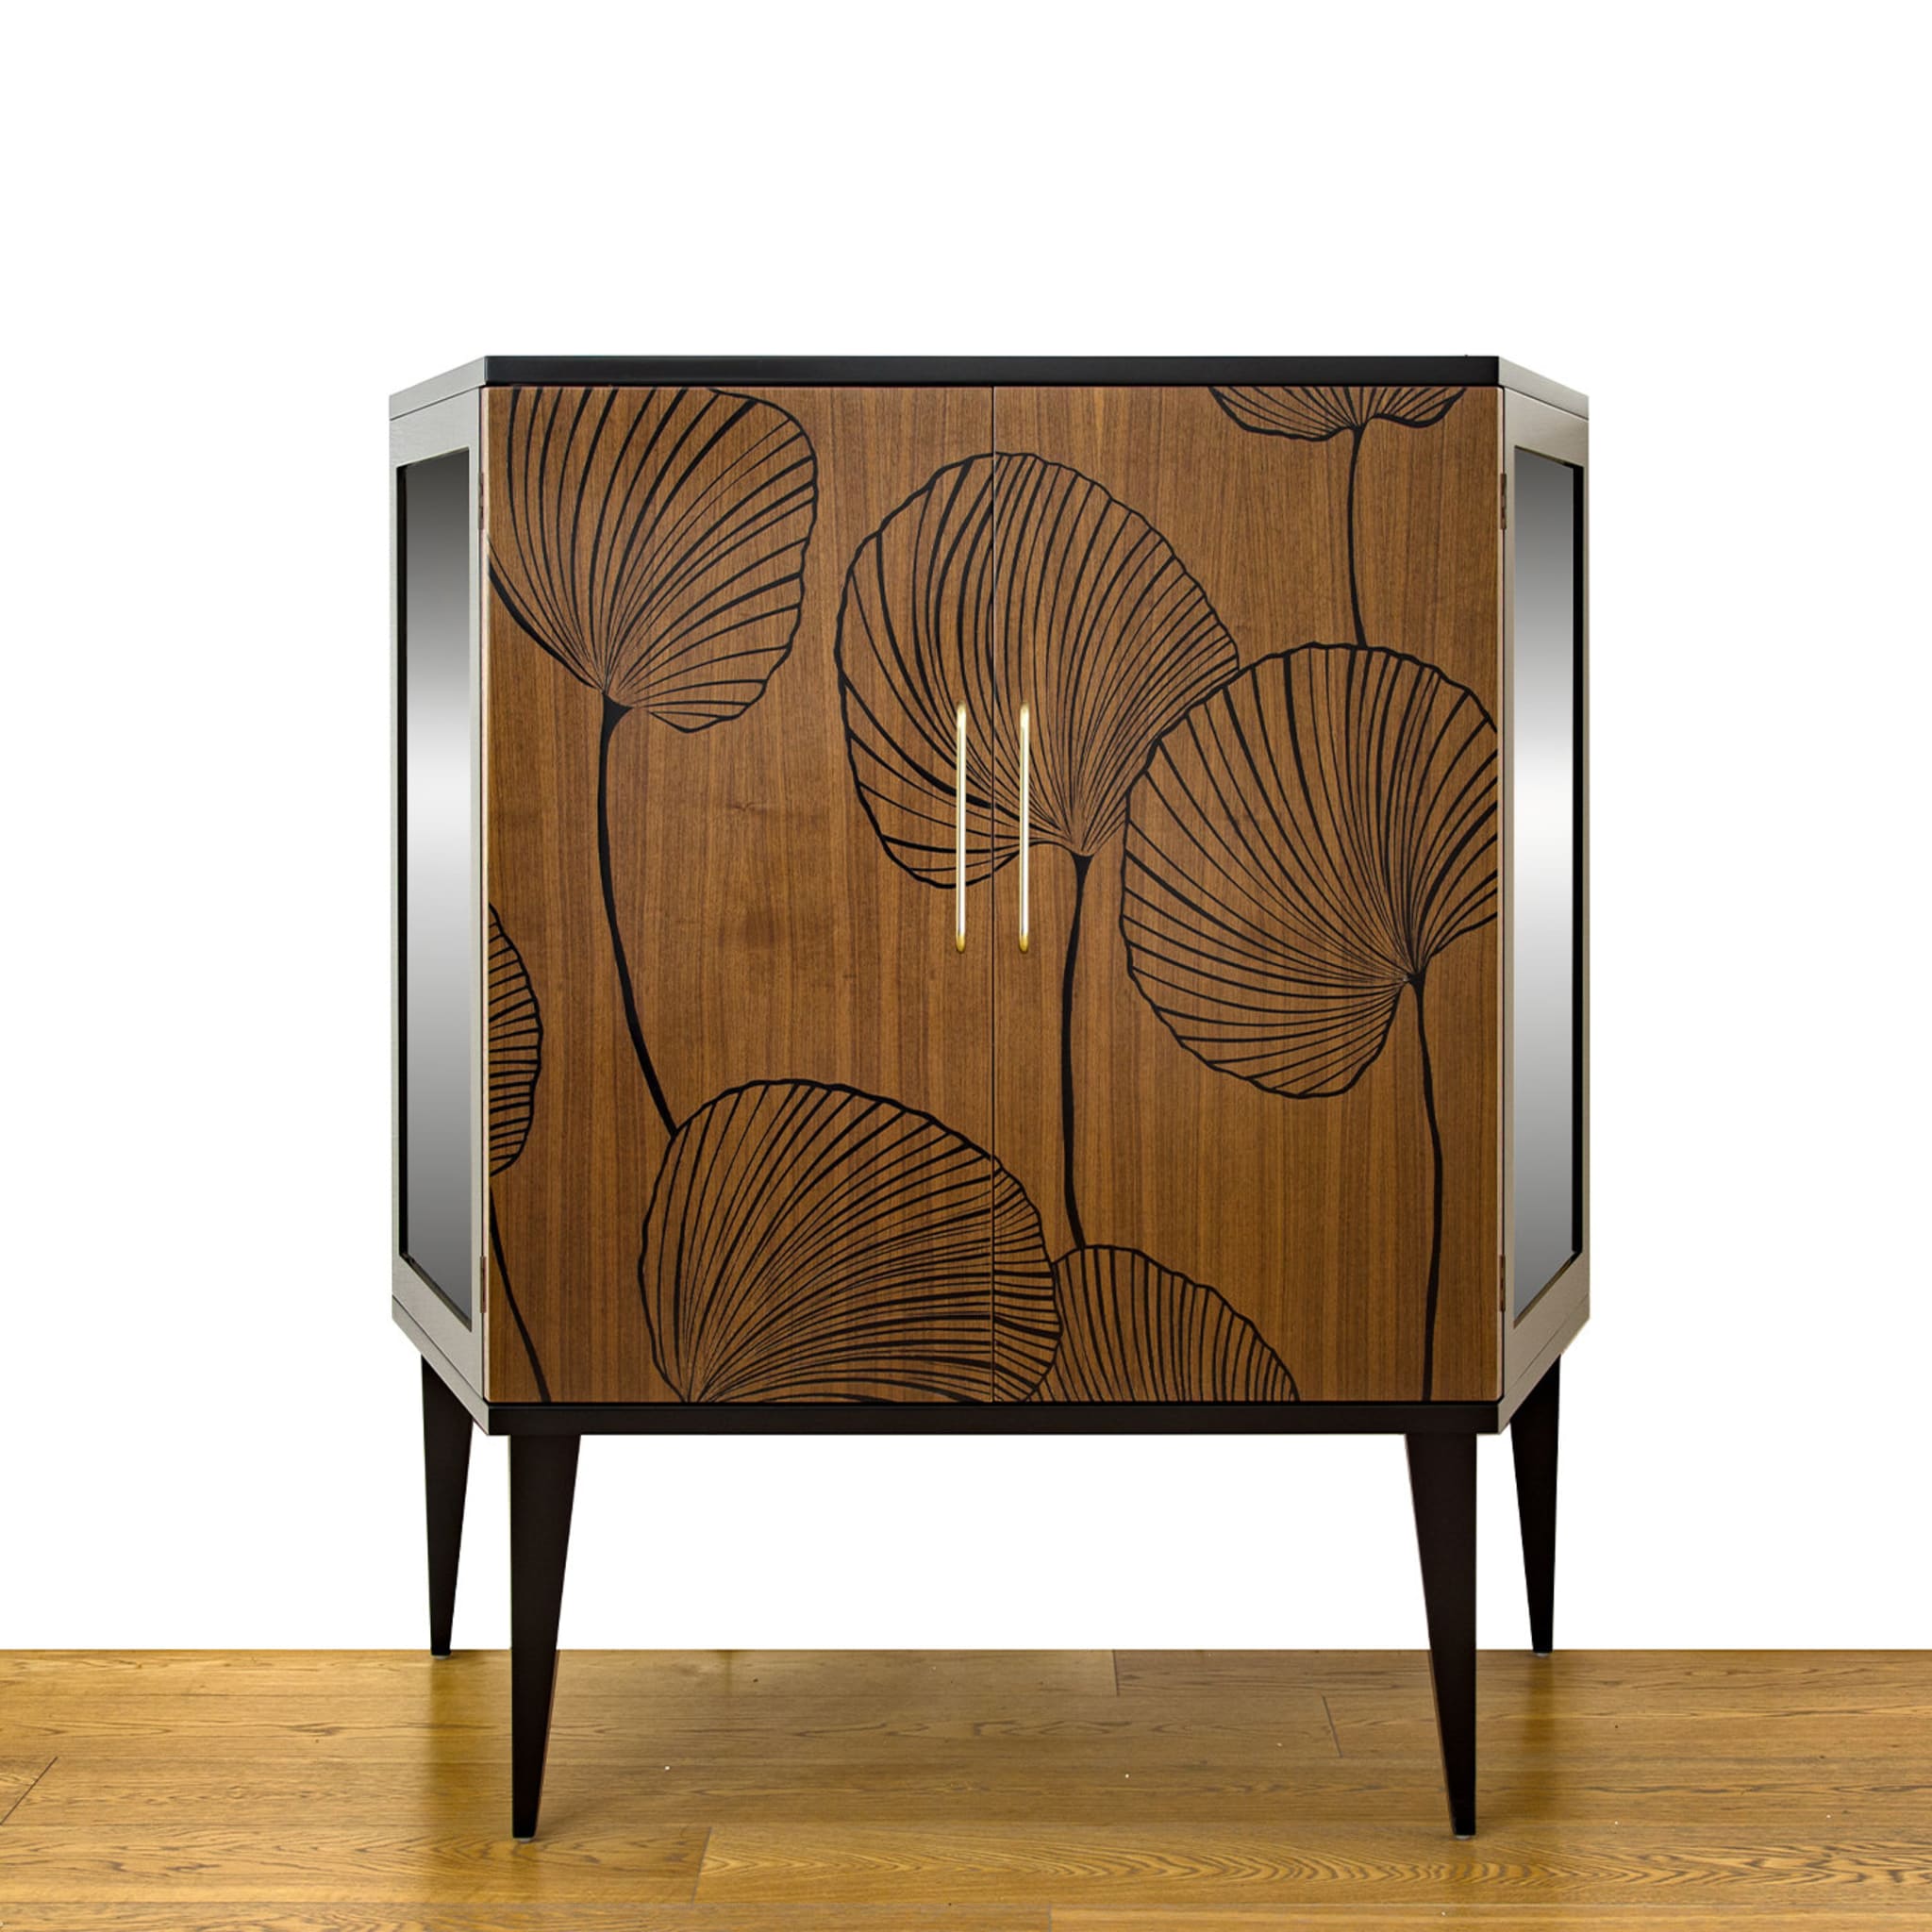 Gingko Shoe Cabinet by Chie Mihara - Alternative view 1